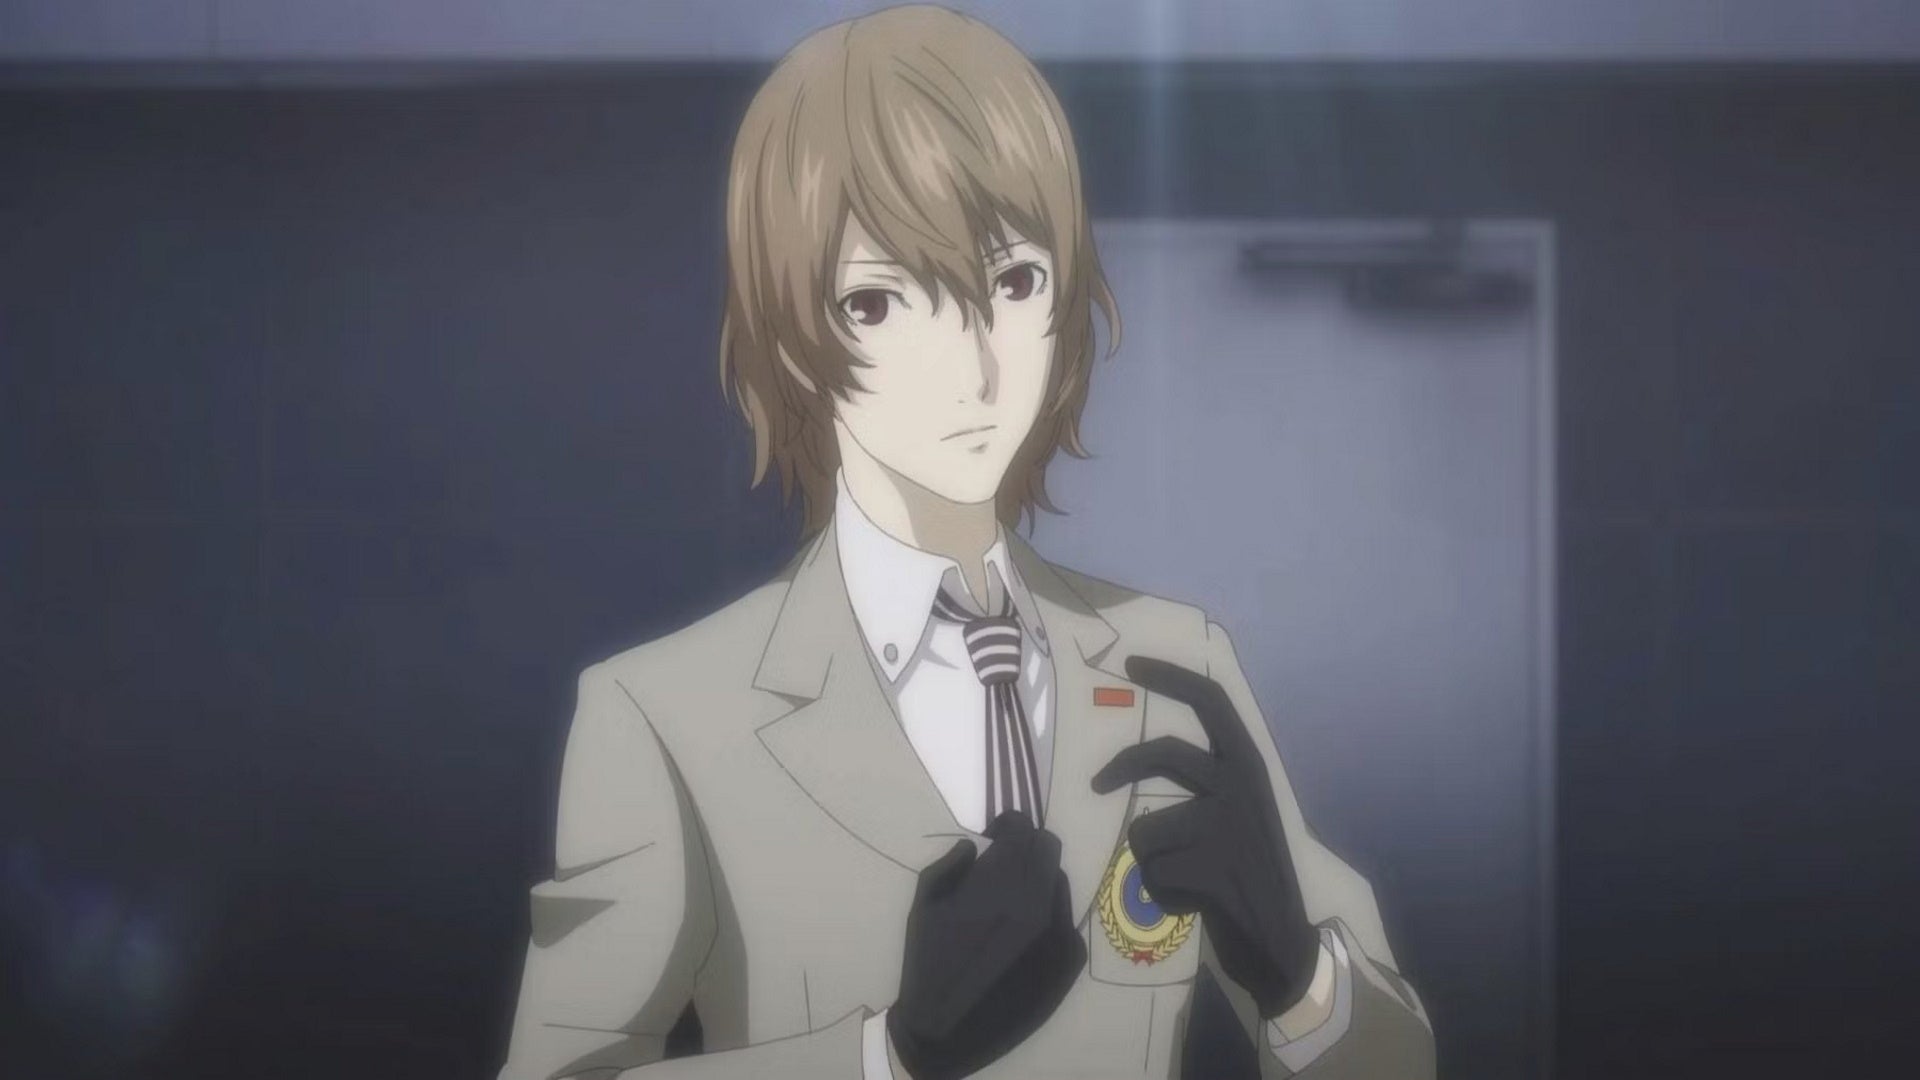 Persona 5 Royal Akechi Confidant: An anime young man wearing black gloves and a grey suit stands in front of a subway station